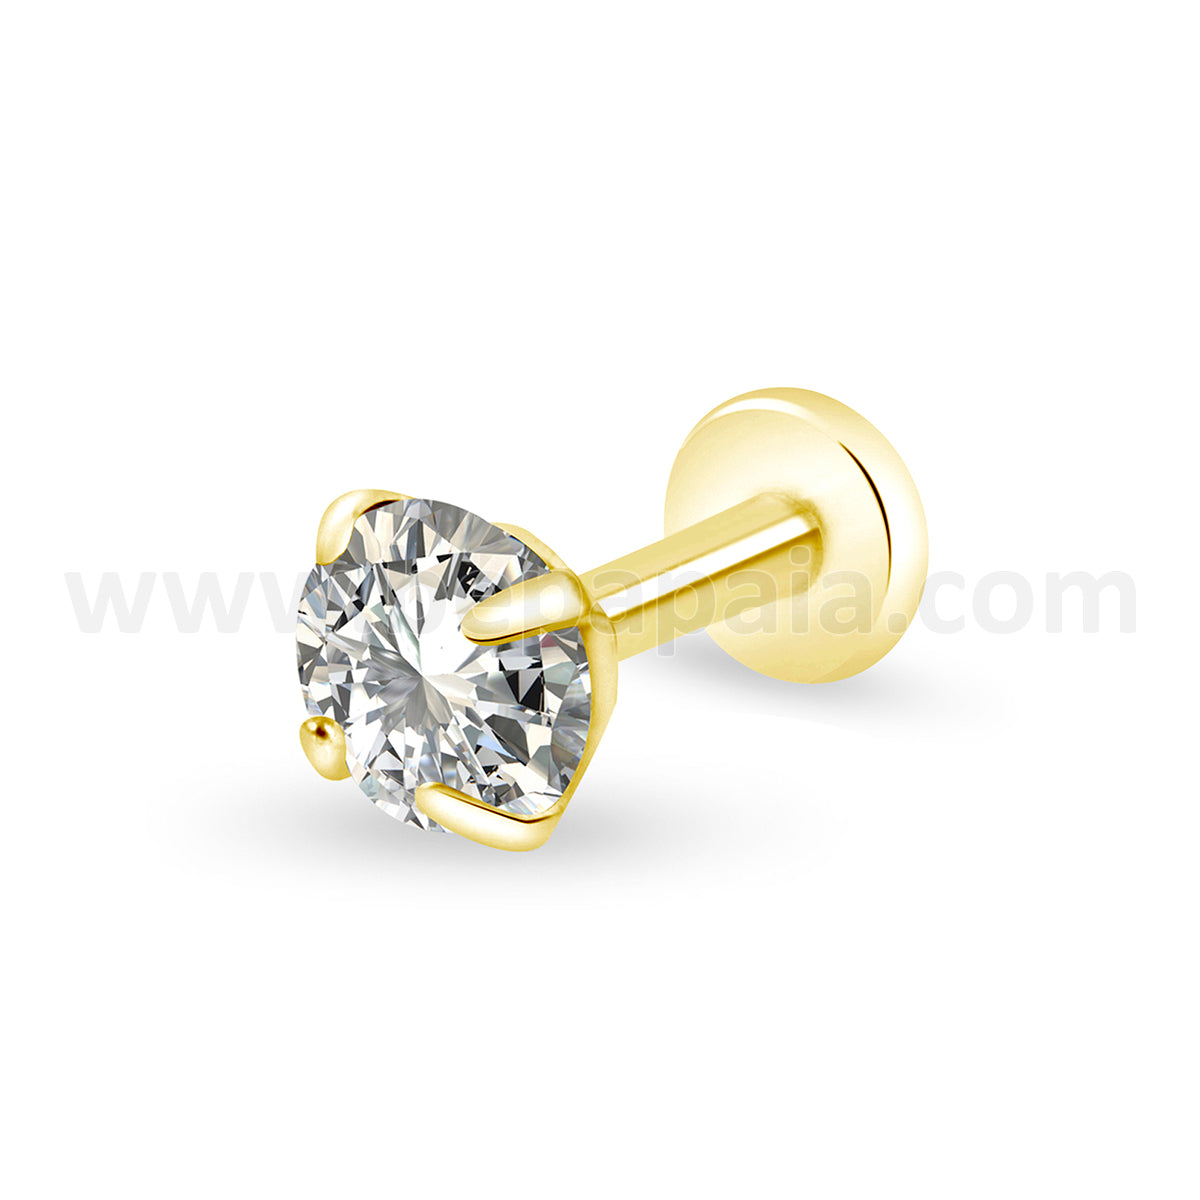 316l surgical steel gold colour ear piercing with zirconia